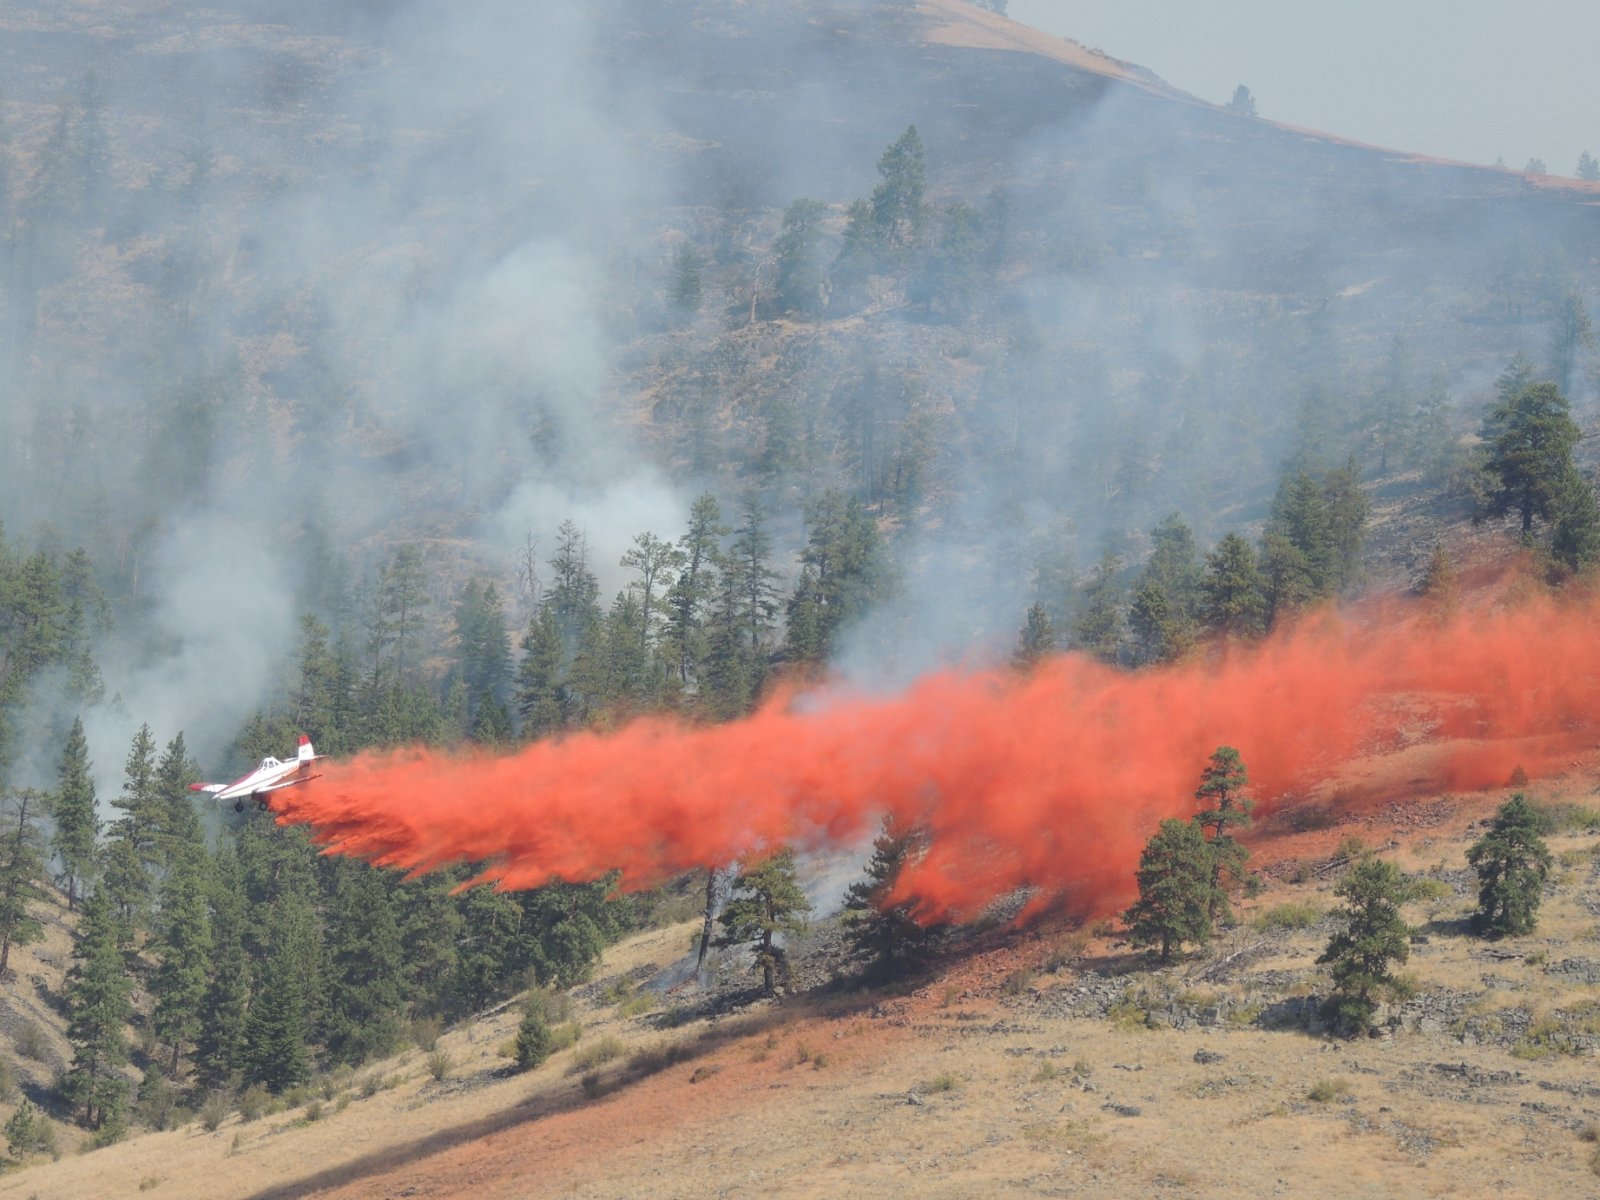 Airplane drops fire retardant on a 2012 fire in the Niobrara Valley